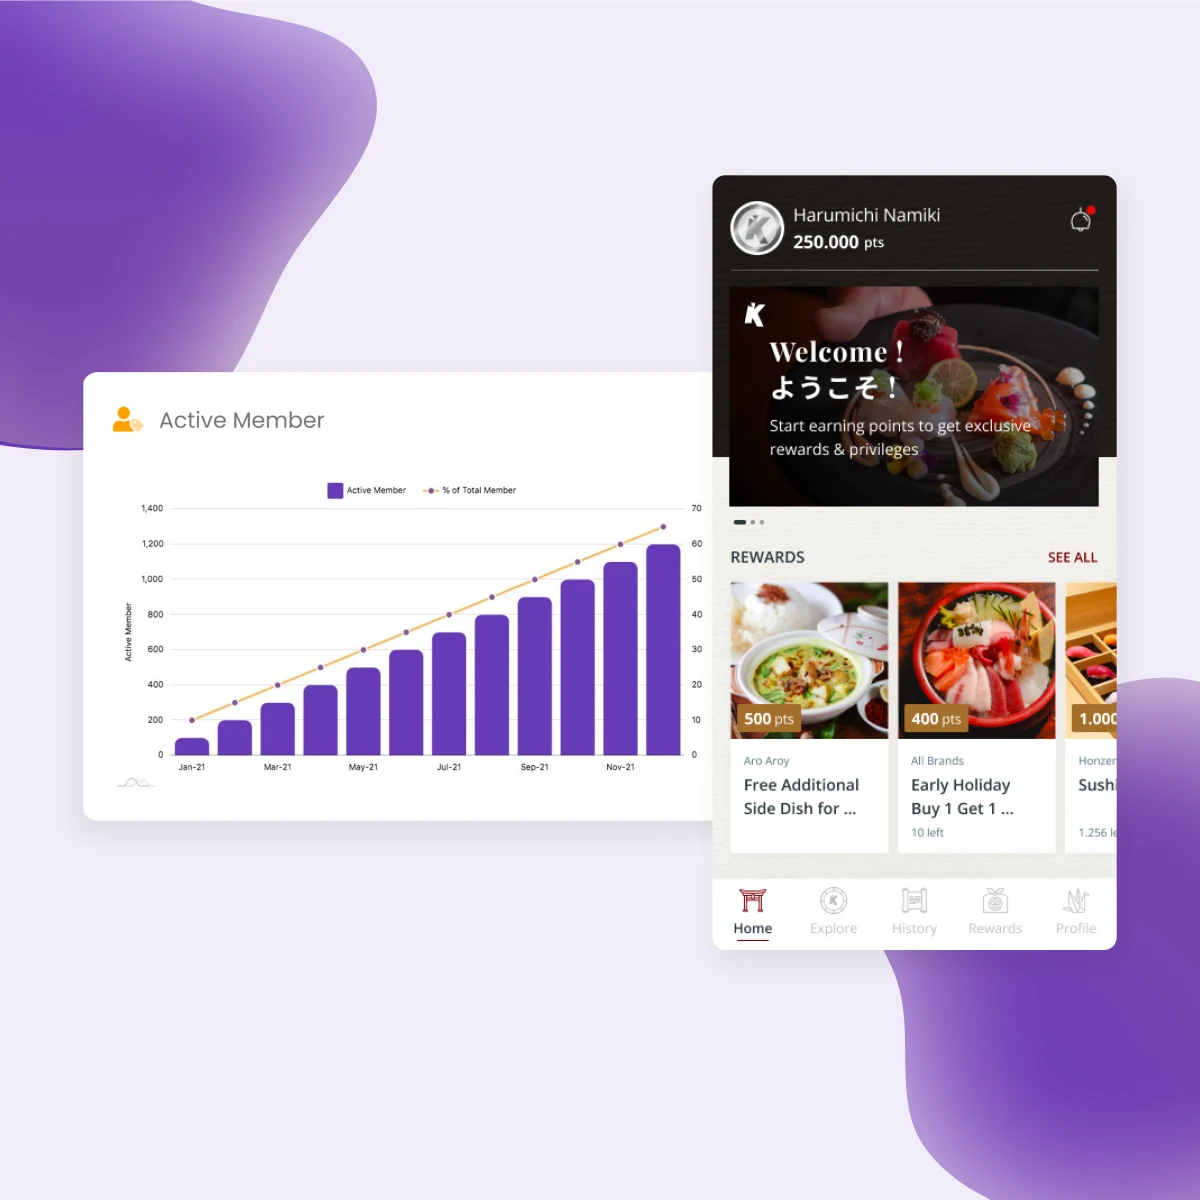 All in One Loyalty Platform for F&B and Retail.